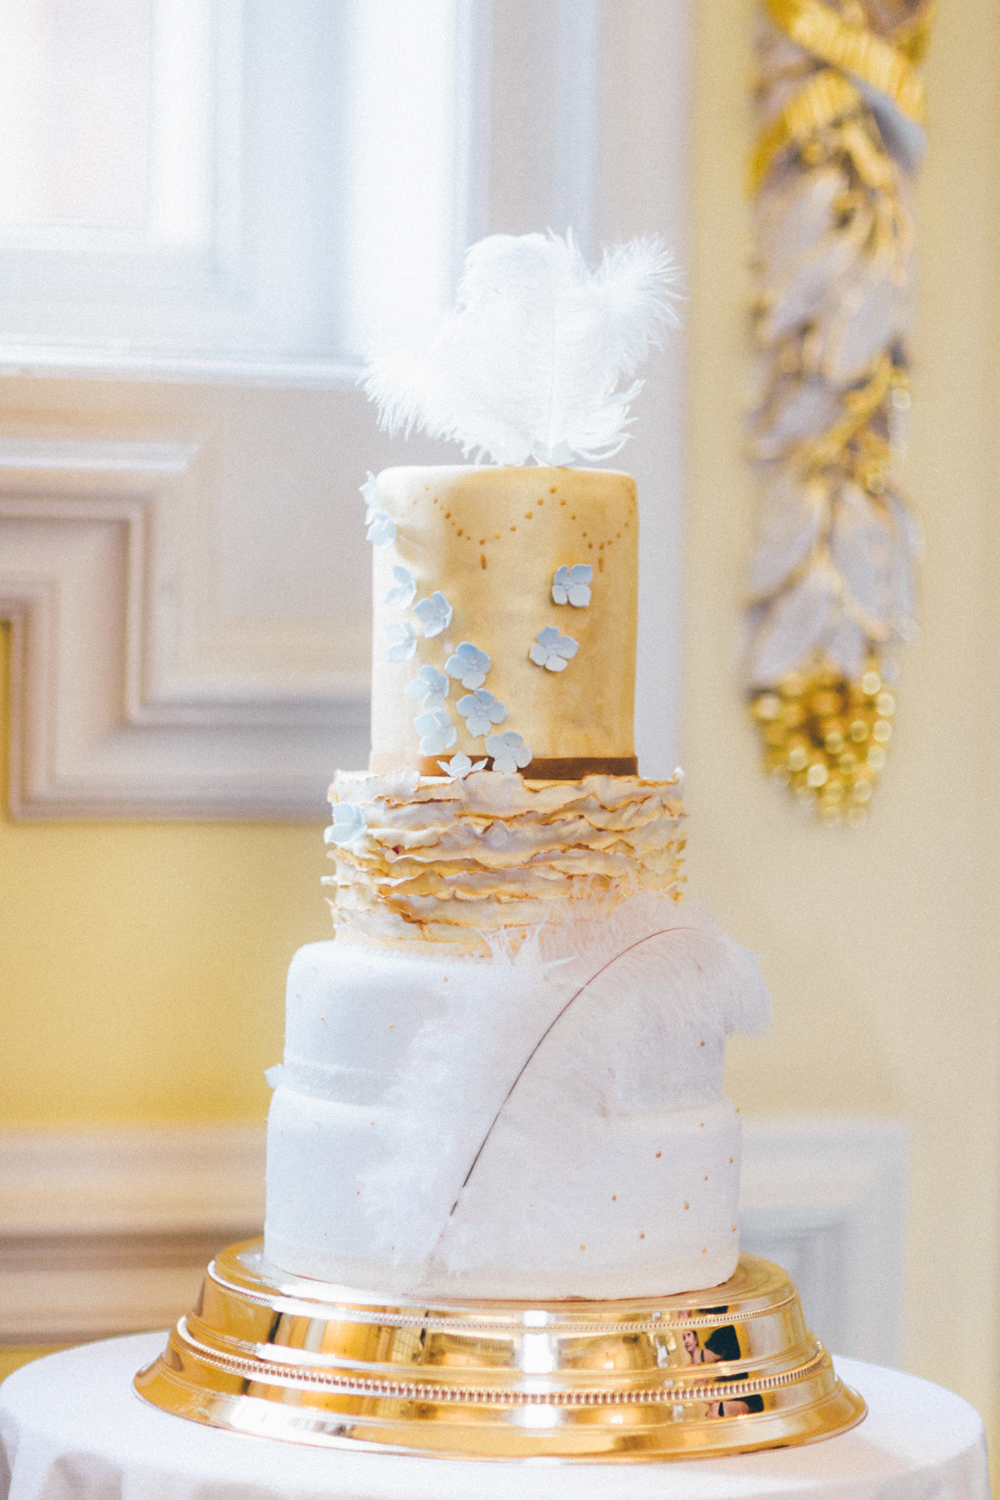 Styled Shoot: Downton Abbey Inspired – Vintage Christmas Elegance